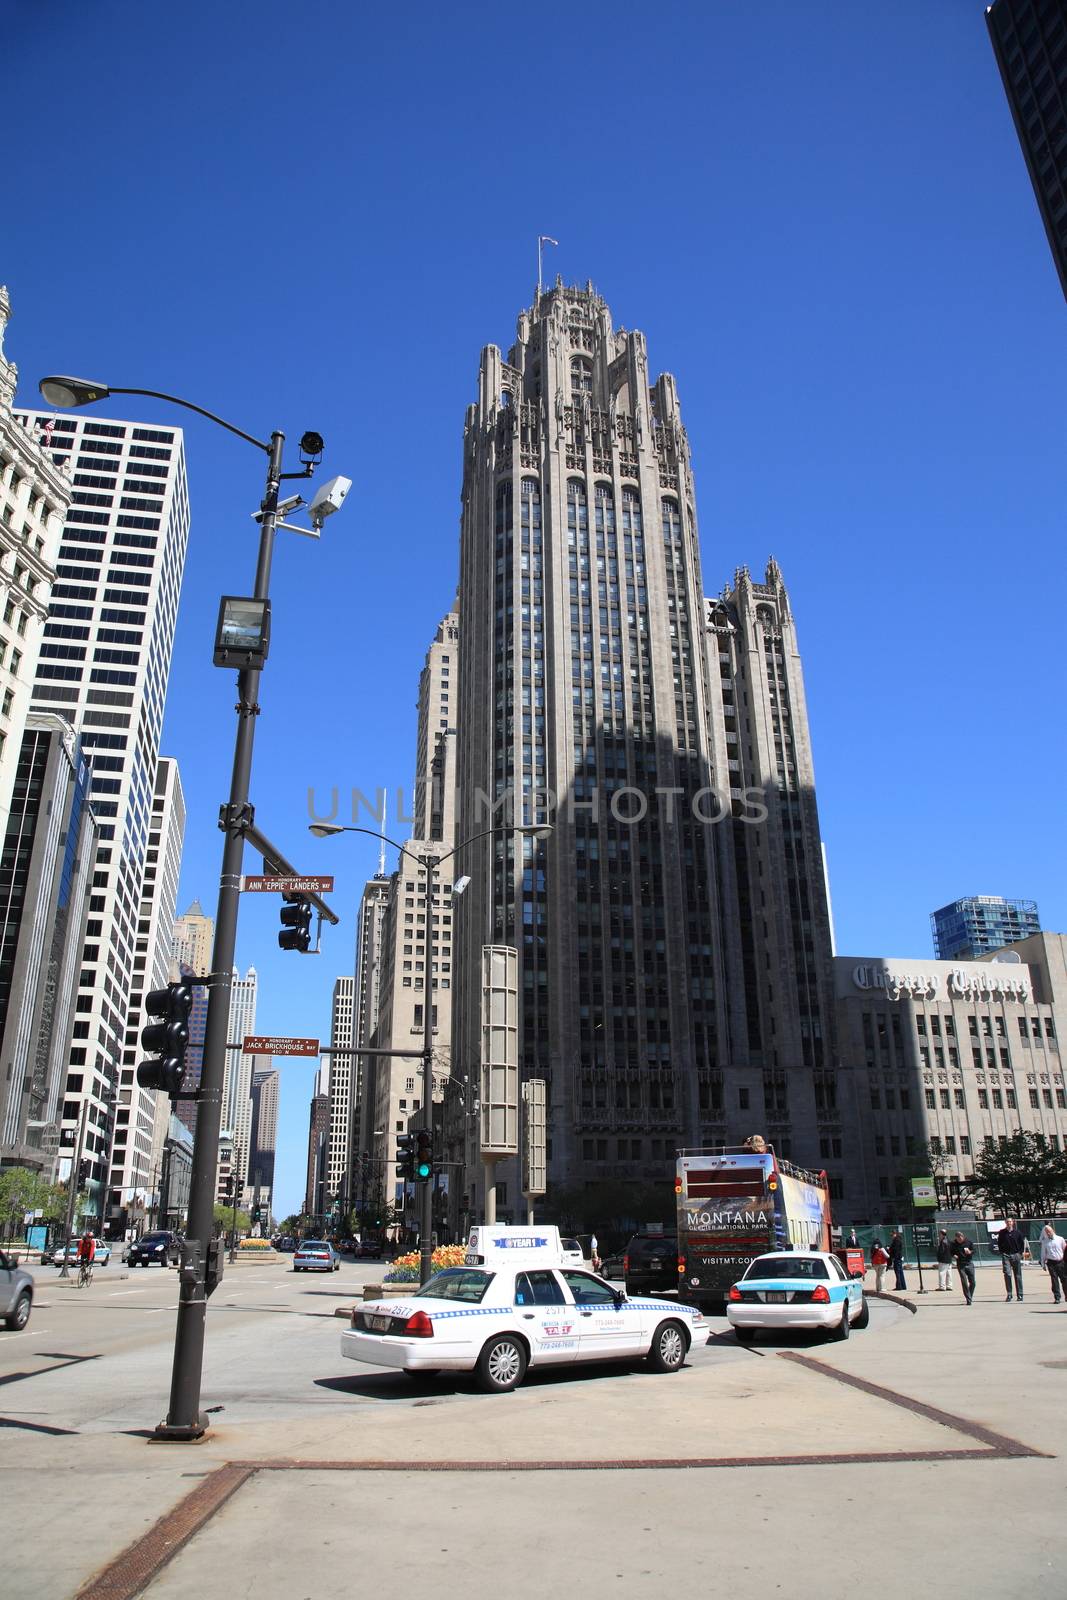 Chicago - Tribune Building by Ffooter